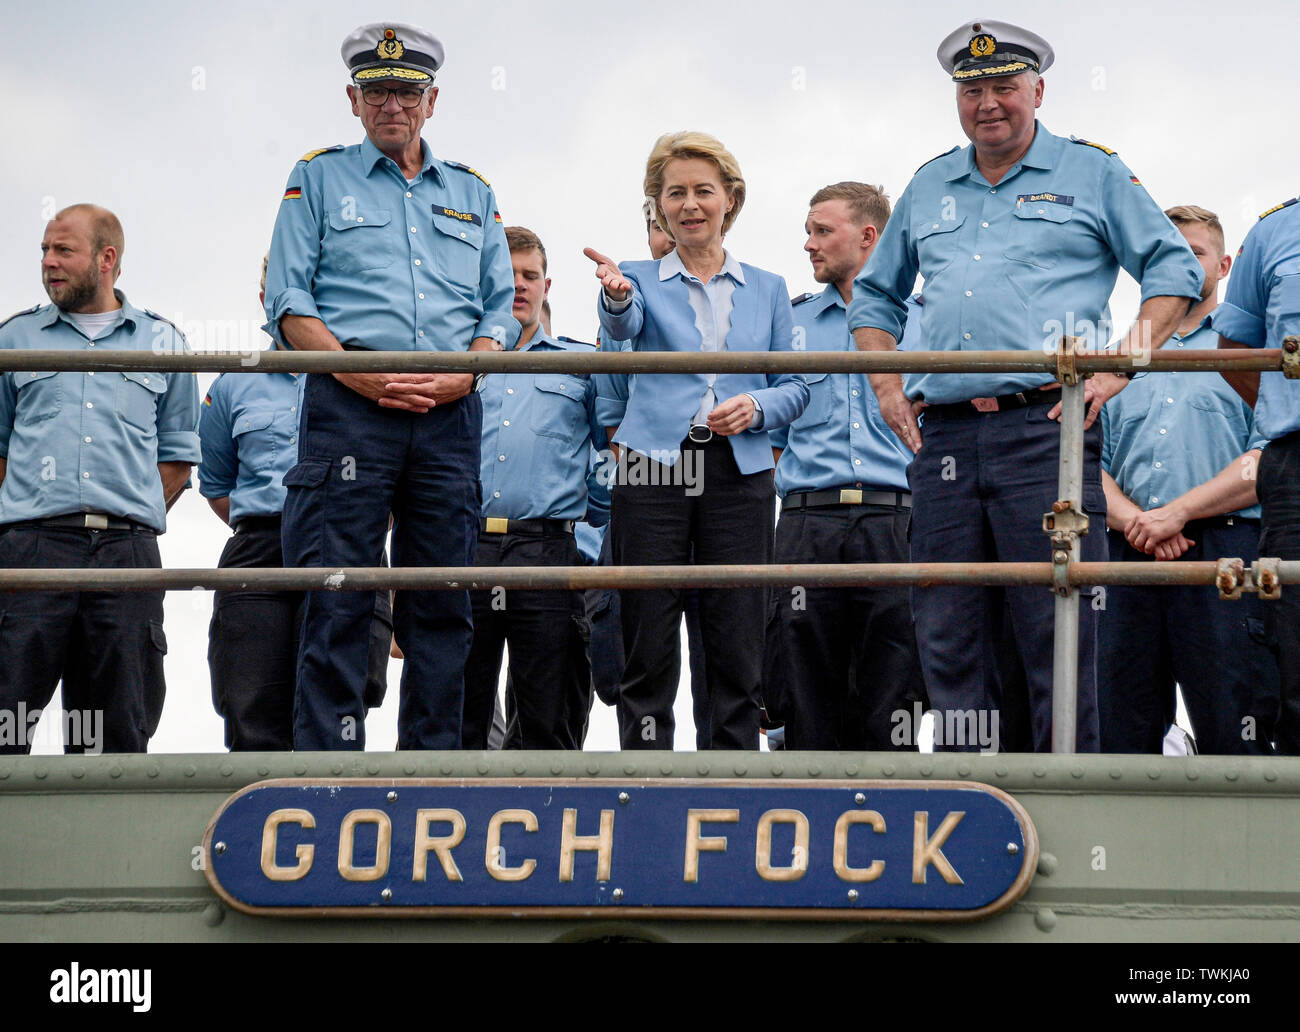 Bremerhaven, Germany. 21st June, 2019. Ursula von der Leyen (M, CDU), Federal Minister of Defence, stands with crew members on deck of the 'Gorch Fock' between Vice Admiral Andreas Krause (l), Inspector of the Navy, and Nils Brandt (r), Commander of the 'Gorch Fock'. The naval training ship 'Gorch Fock' was launched in Bremerhaven after more than three years in the dock again. Credit: Axel Heimken/dpa/Alamy Live News Stock Photo